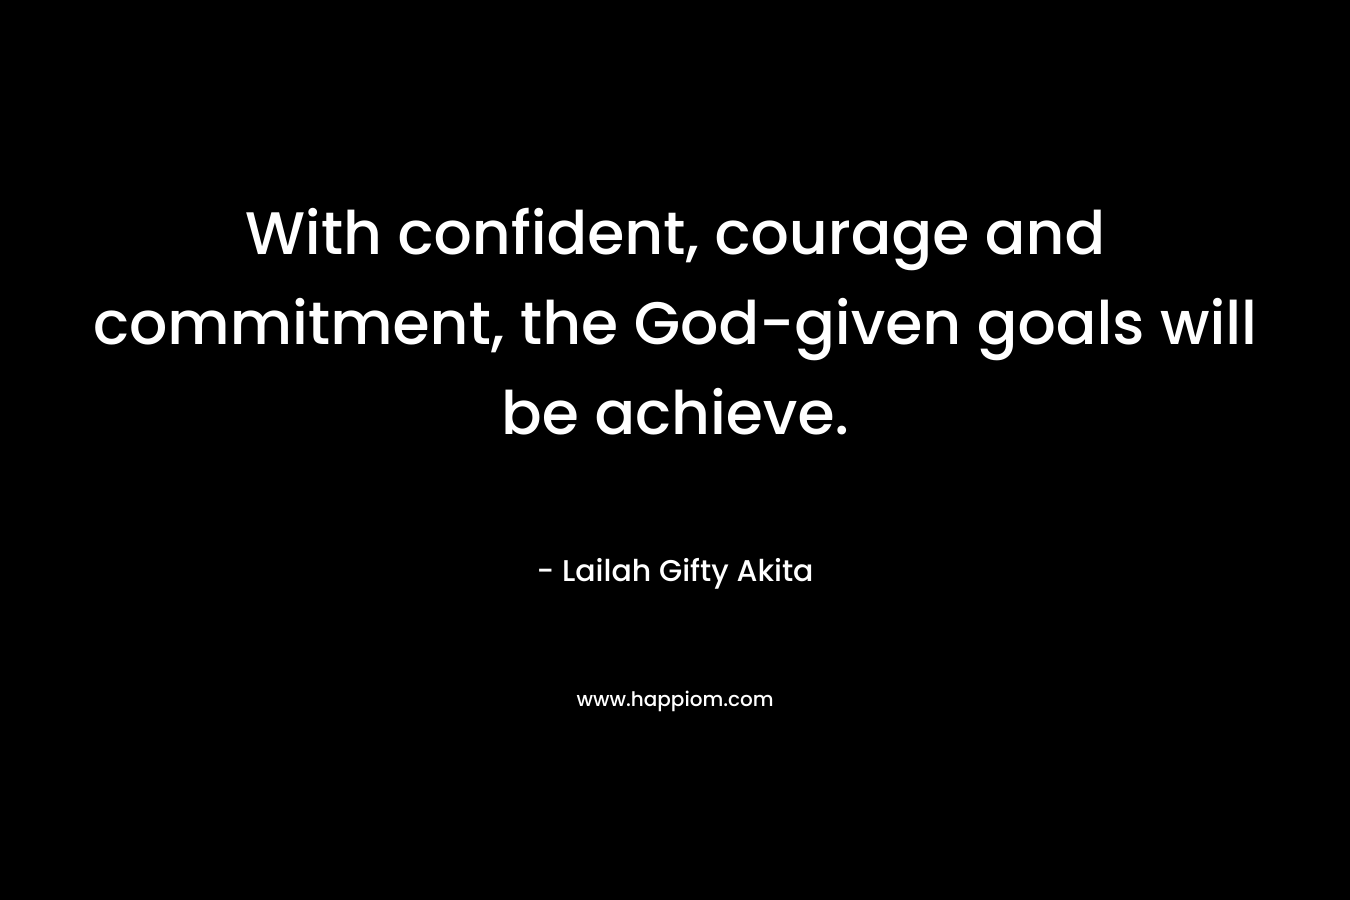 With confident, courage and commitment, the God-given goals will be achieve.